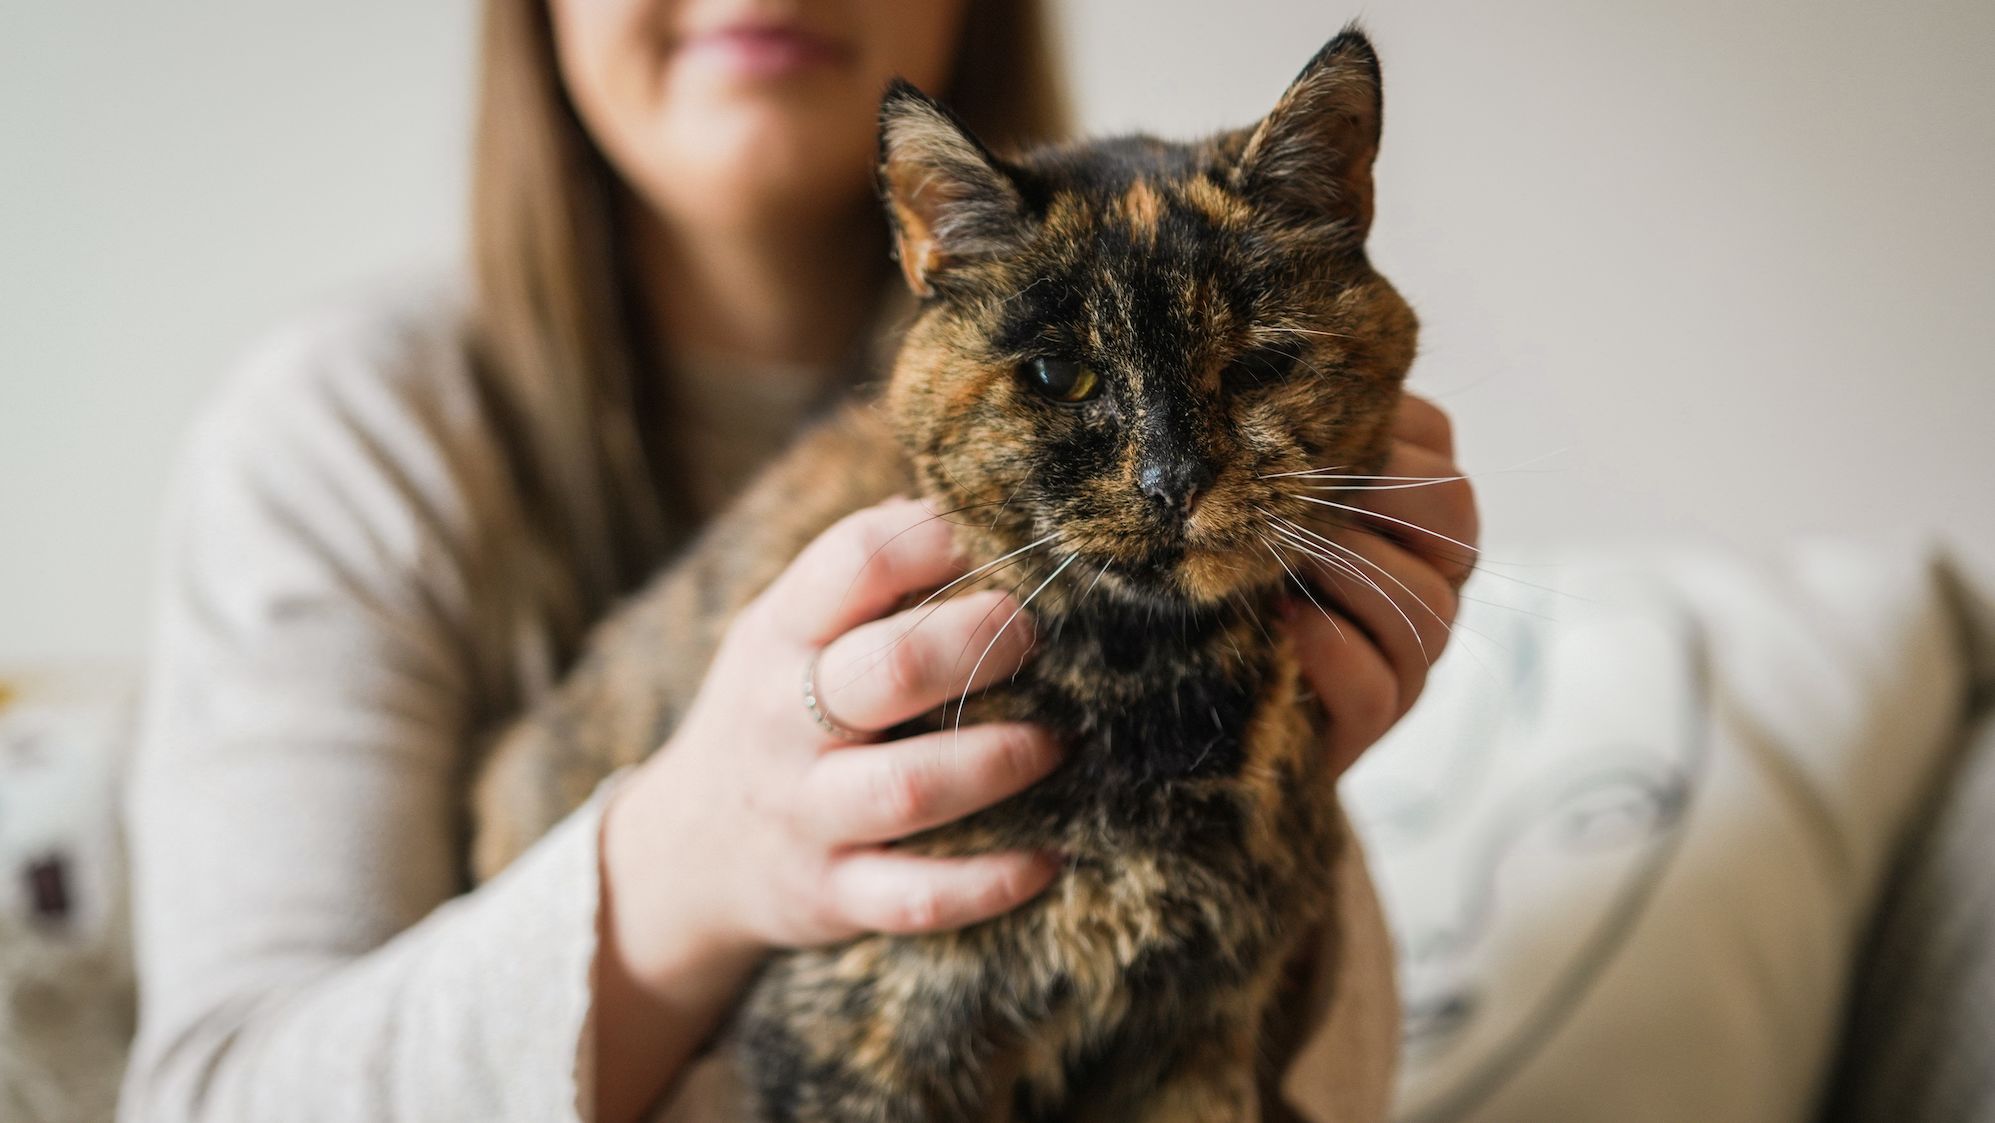 At the age of 26 years and 329 day, Flossie has been recognized as the oldest cat alive.